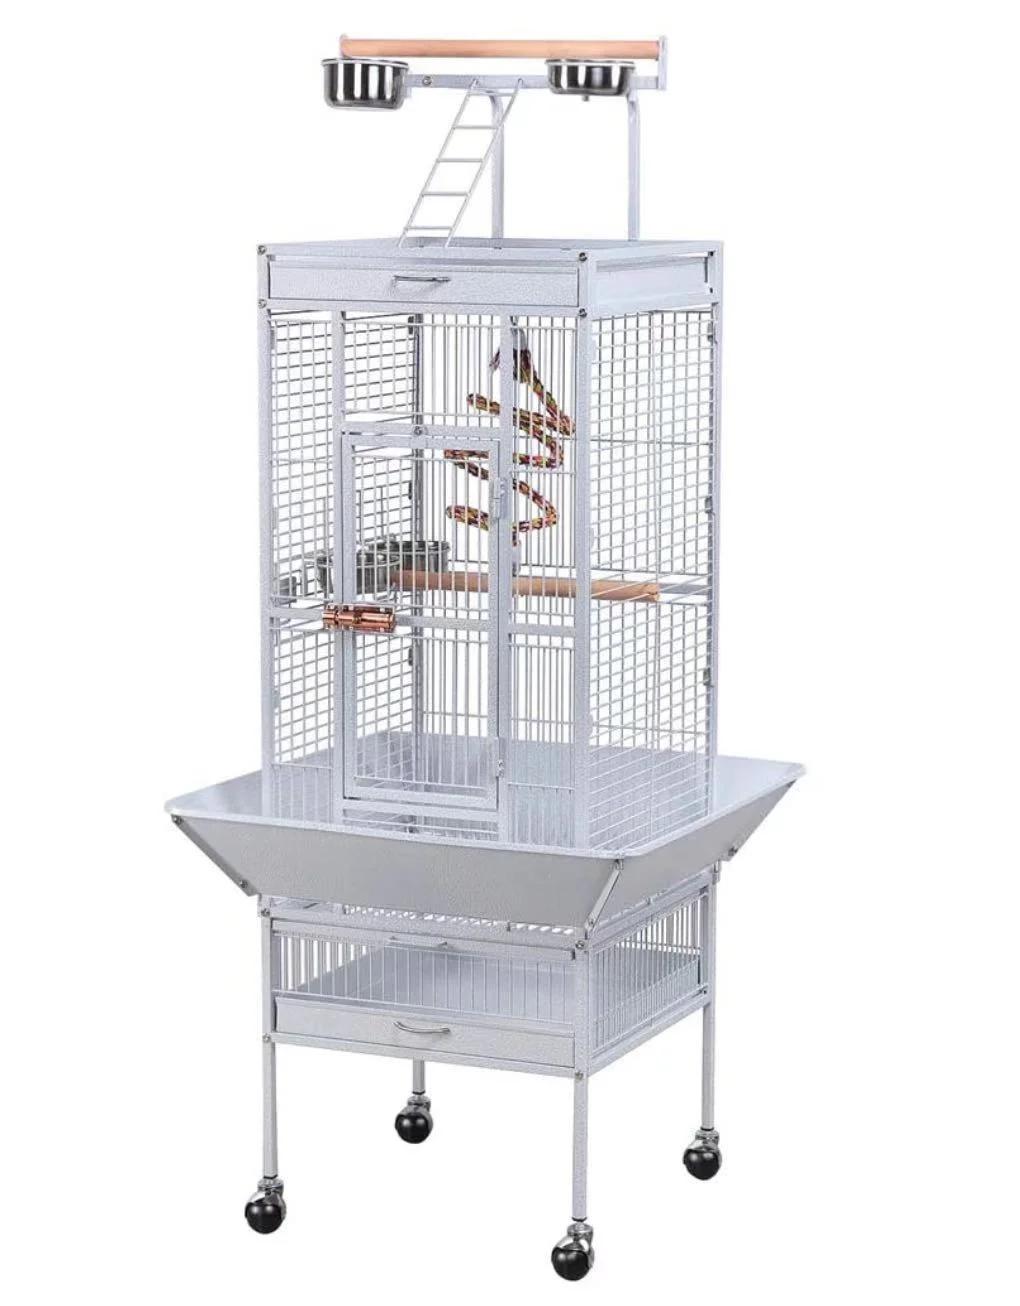 Wrought Iron Open Play Top Perch with Rolling Stand Castor Wheels Feeding Bowl for Parrot Cockatiel Finch Pet House Wholesale Large Bird Cage